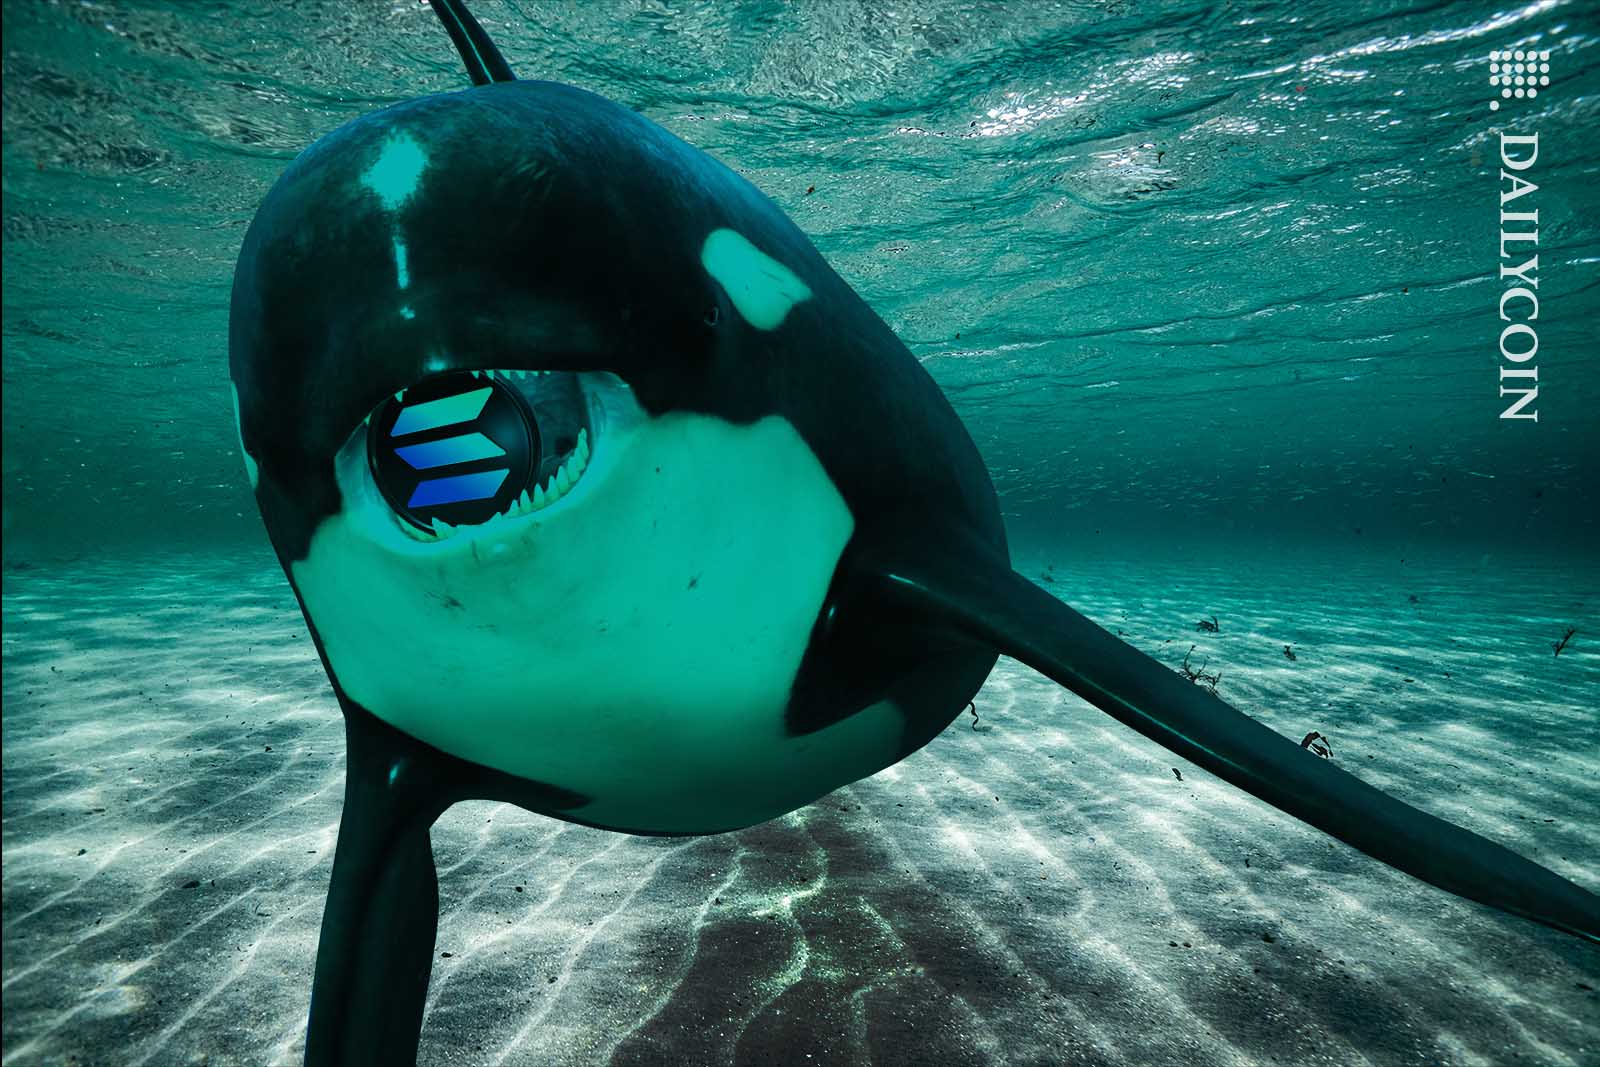 Orca holds a Solana SOL coin in its mouth under water.